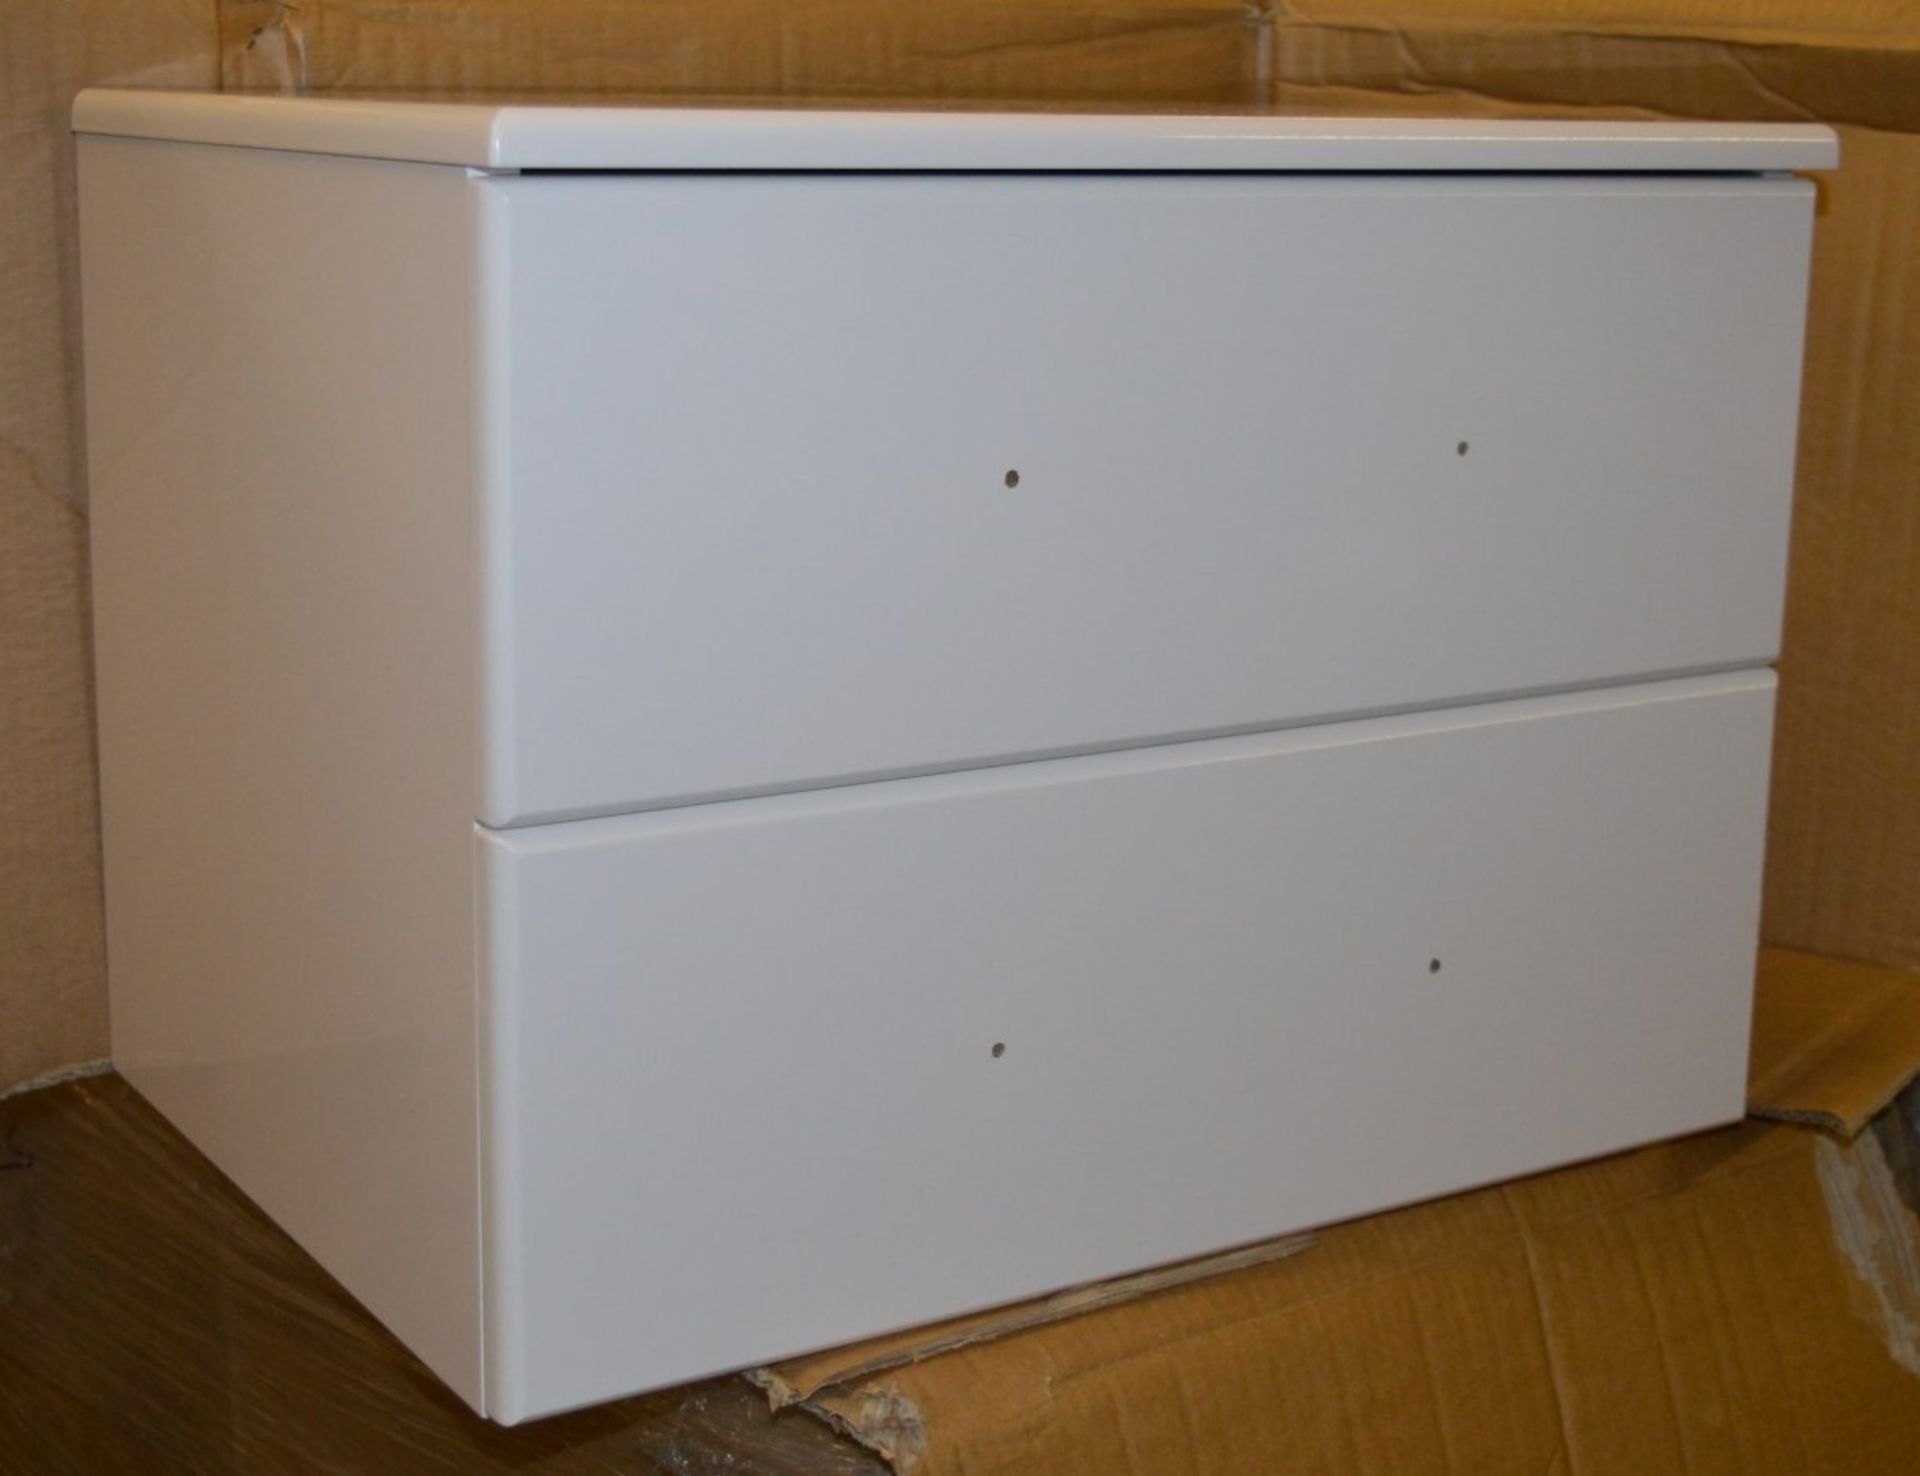 1 x Venizia Wall Hung Drawer Unit in White Gloss - H40 x W55 x D40 cms  - Includes Metal Drawer